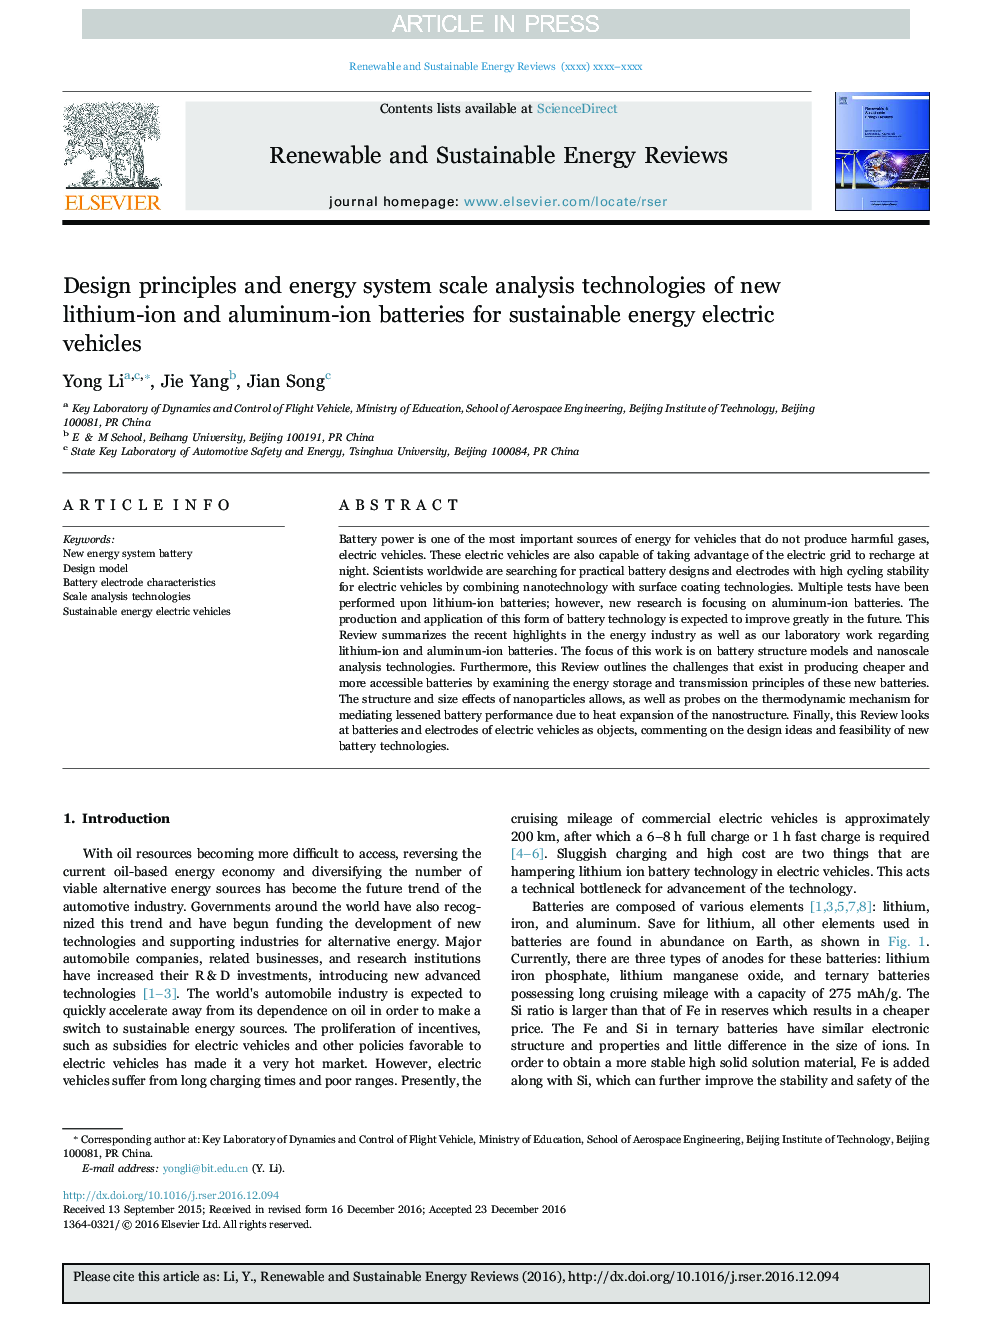 Design principles and energy system scale analysis technologies of new lithium-ion and aluminum-ion batteries for sustainable energy electric vehicles